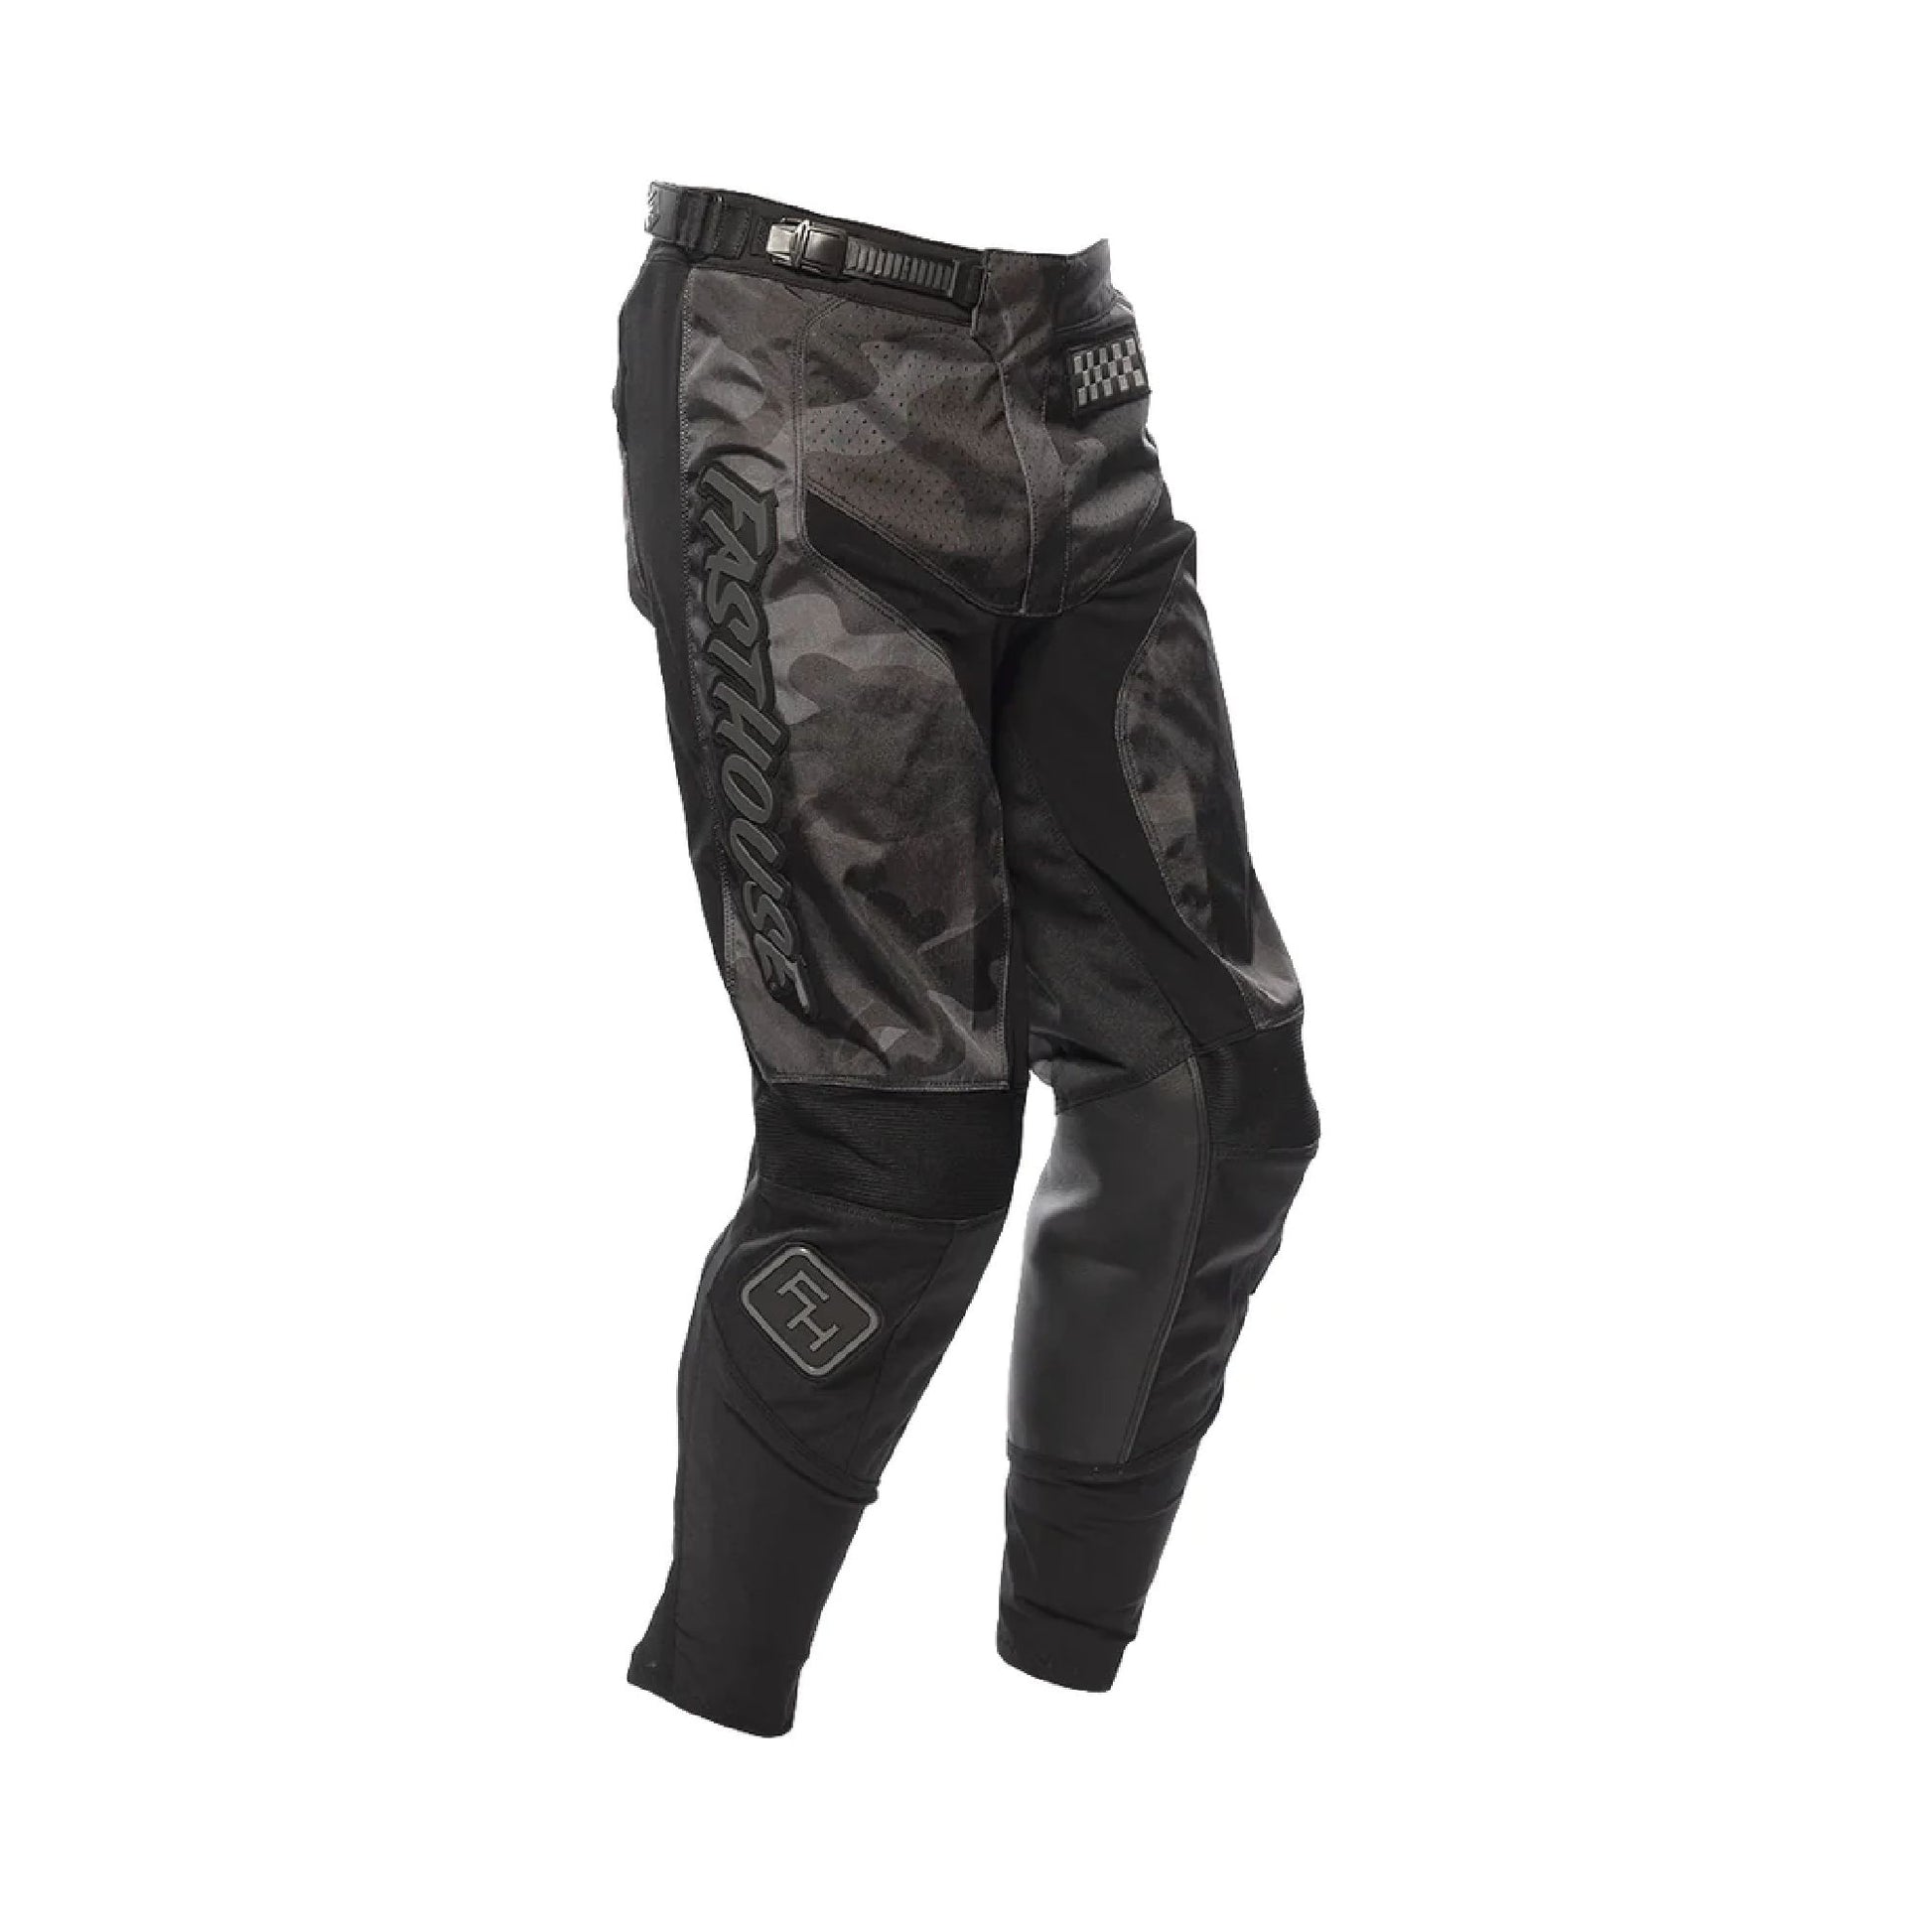 Fasthouse Youth Grindhouse Pants Camo Black Bike Pants